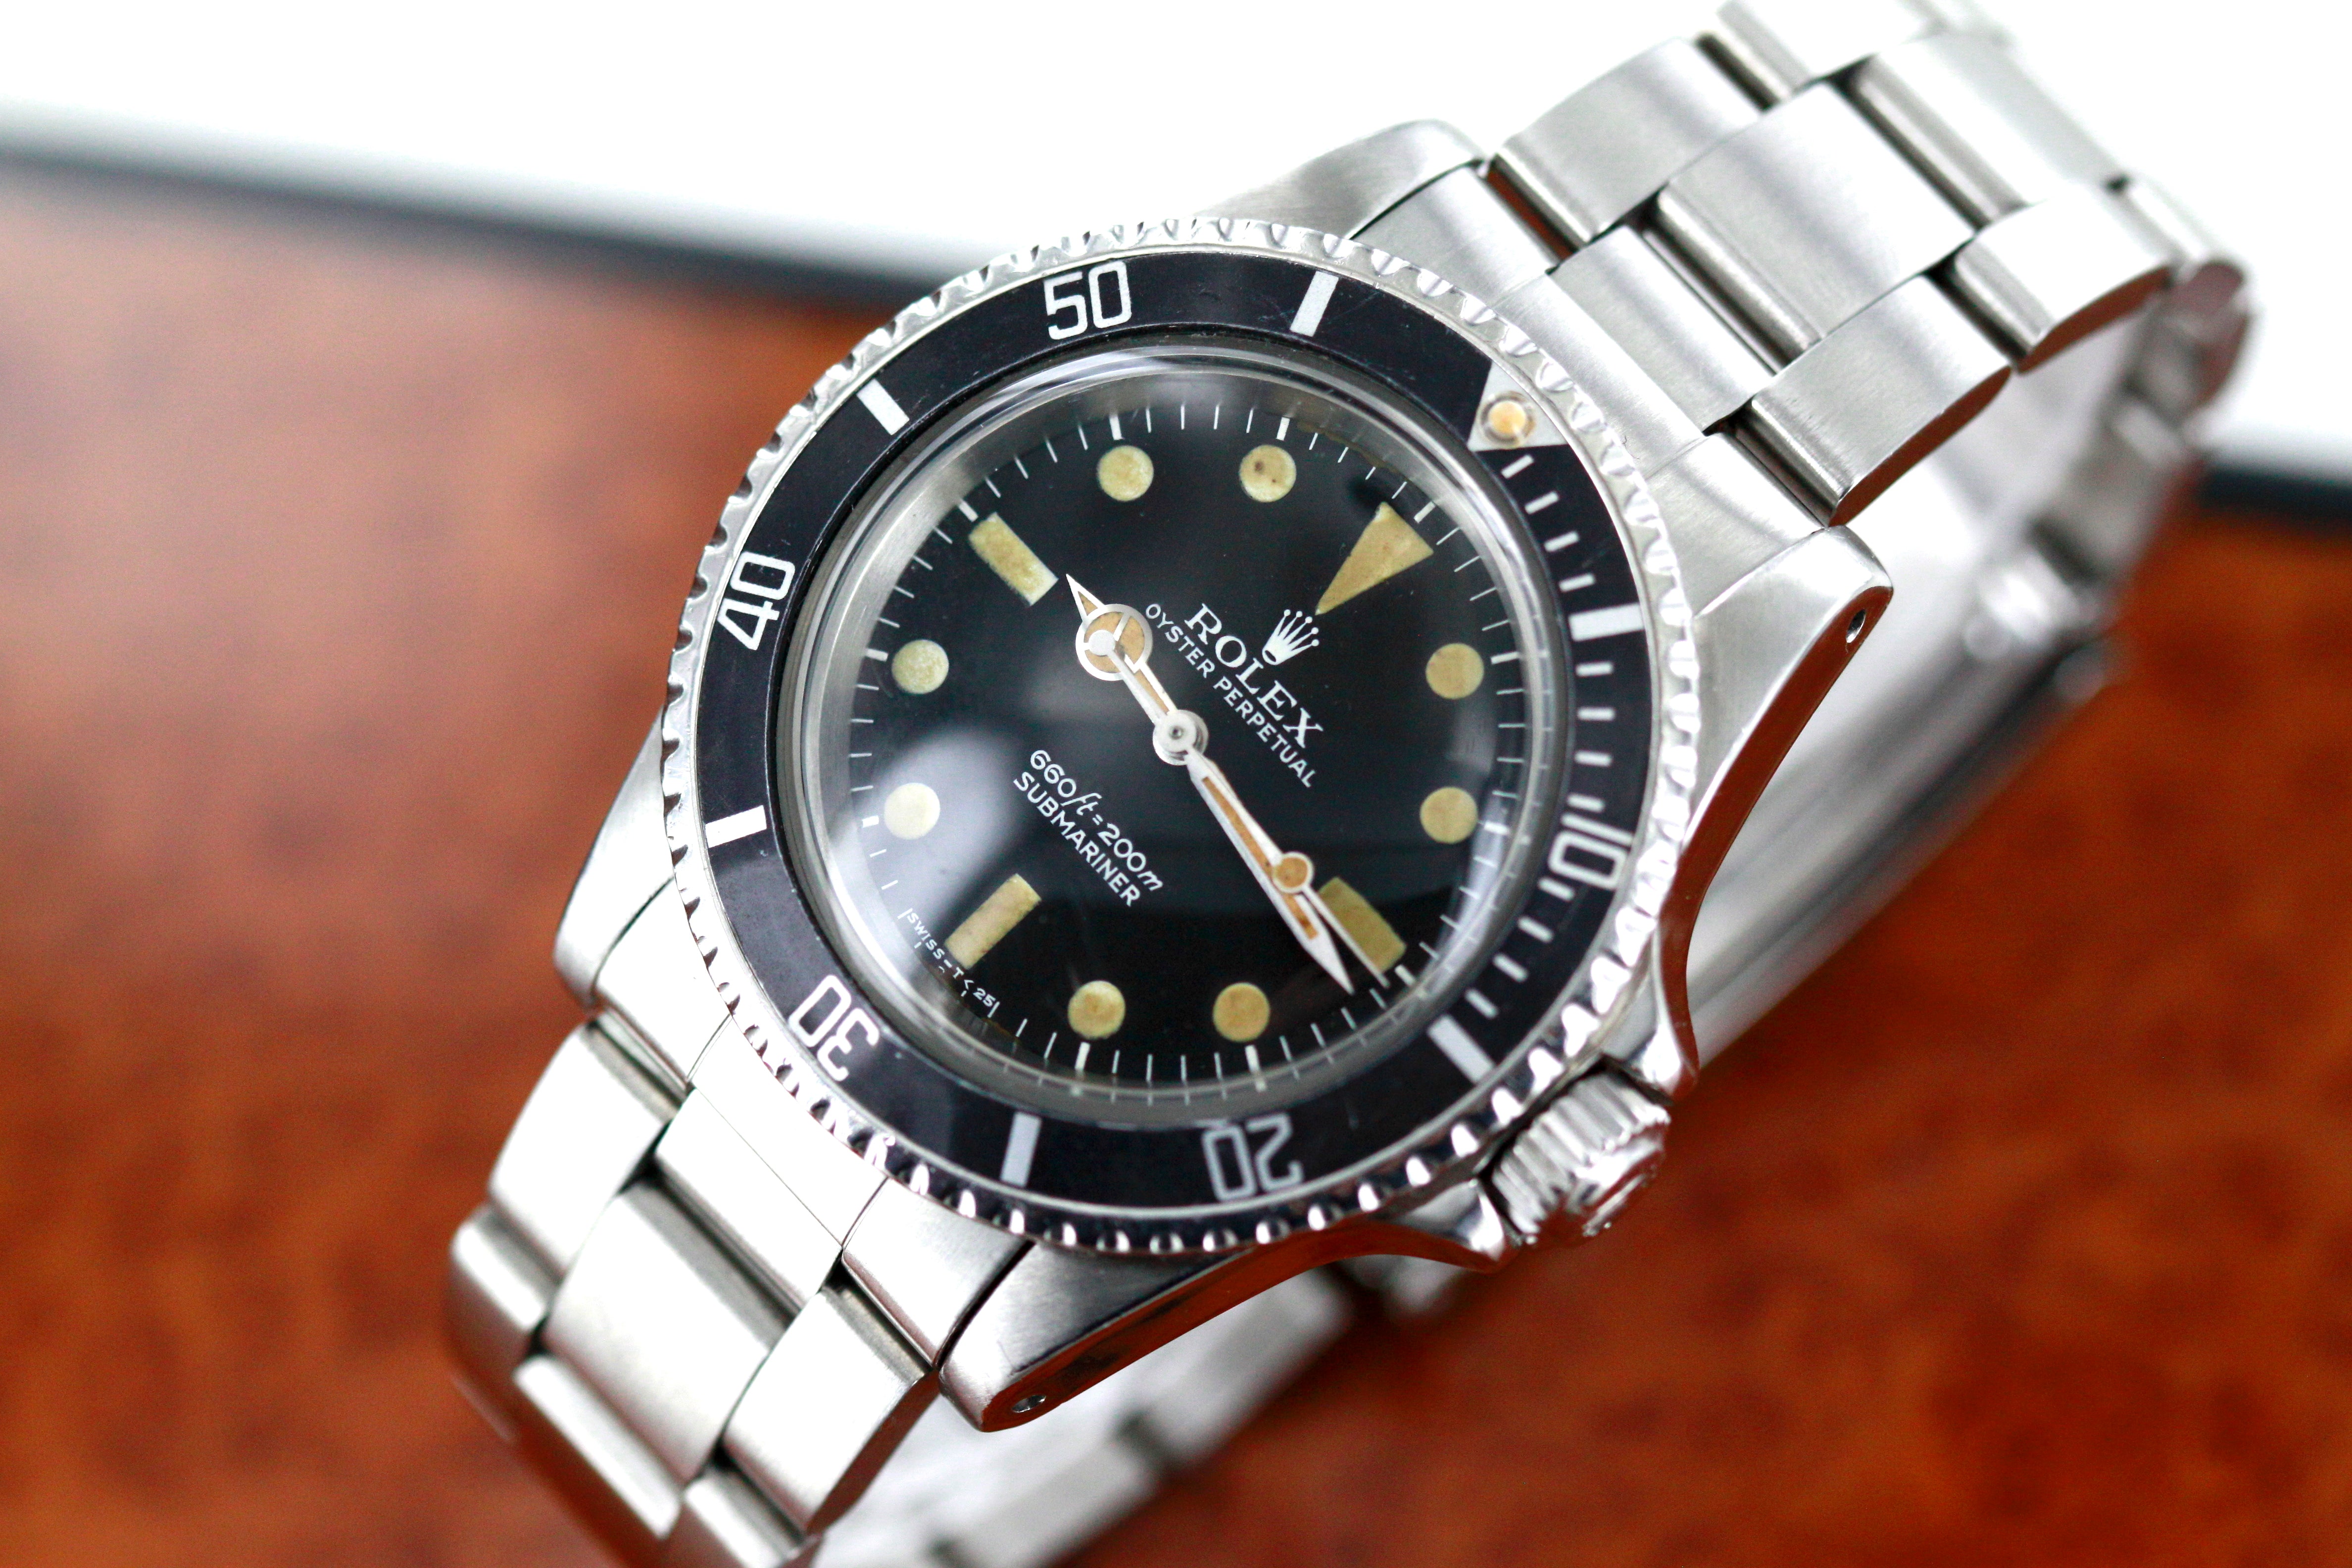 Rolex Submariner Referenz 5513 MAXI DIAL FROM 1977